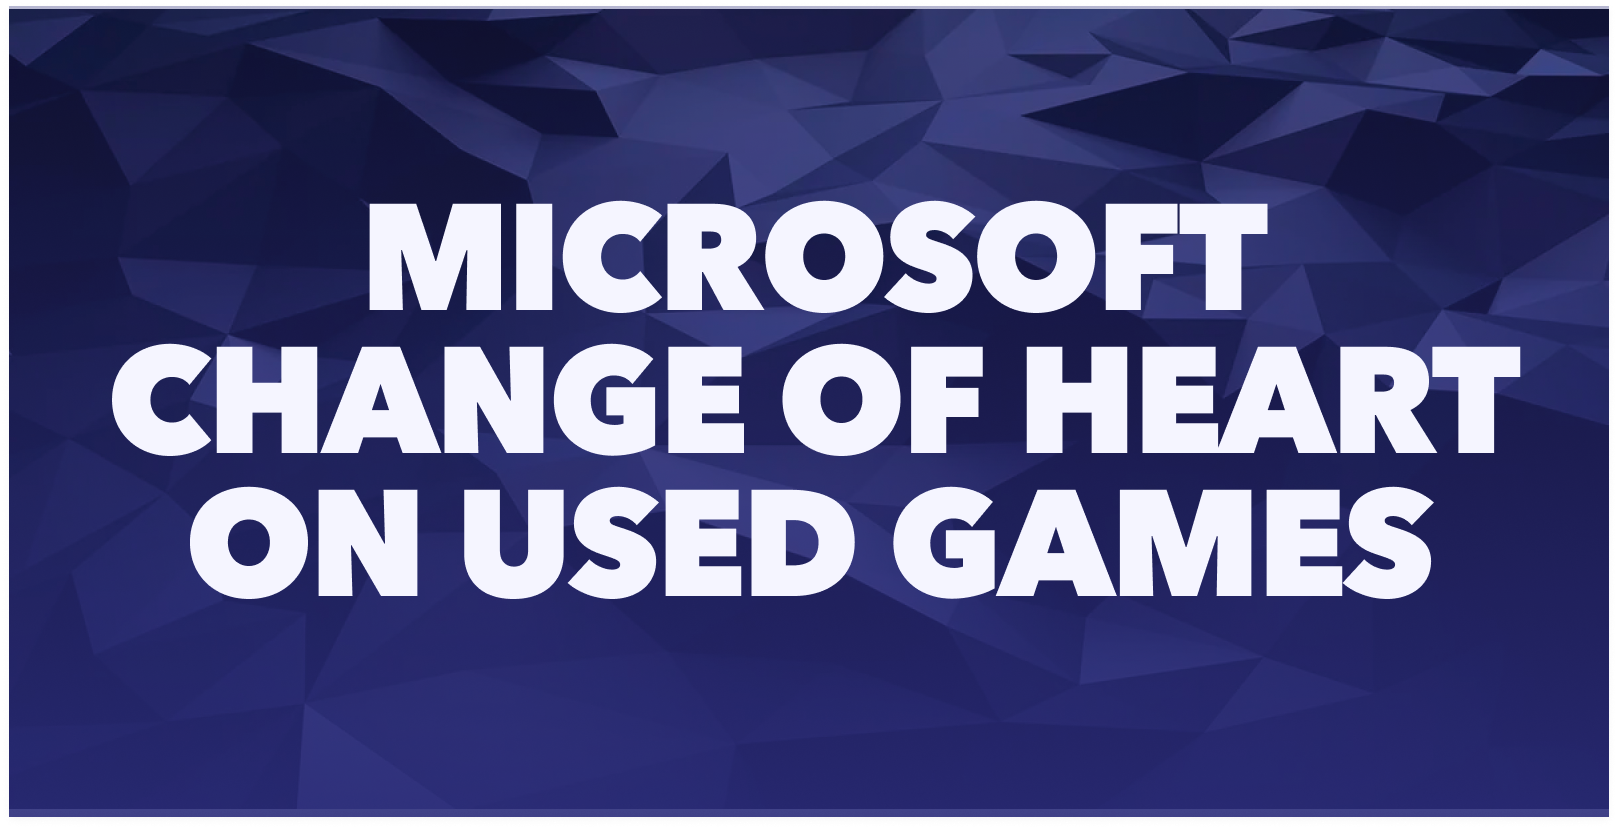 Microsoft Change of Heart on Used Games Graphic